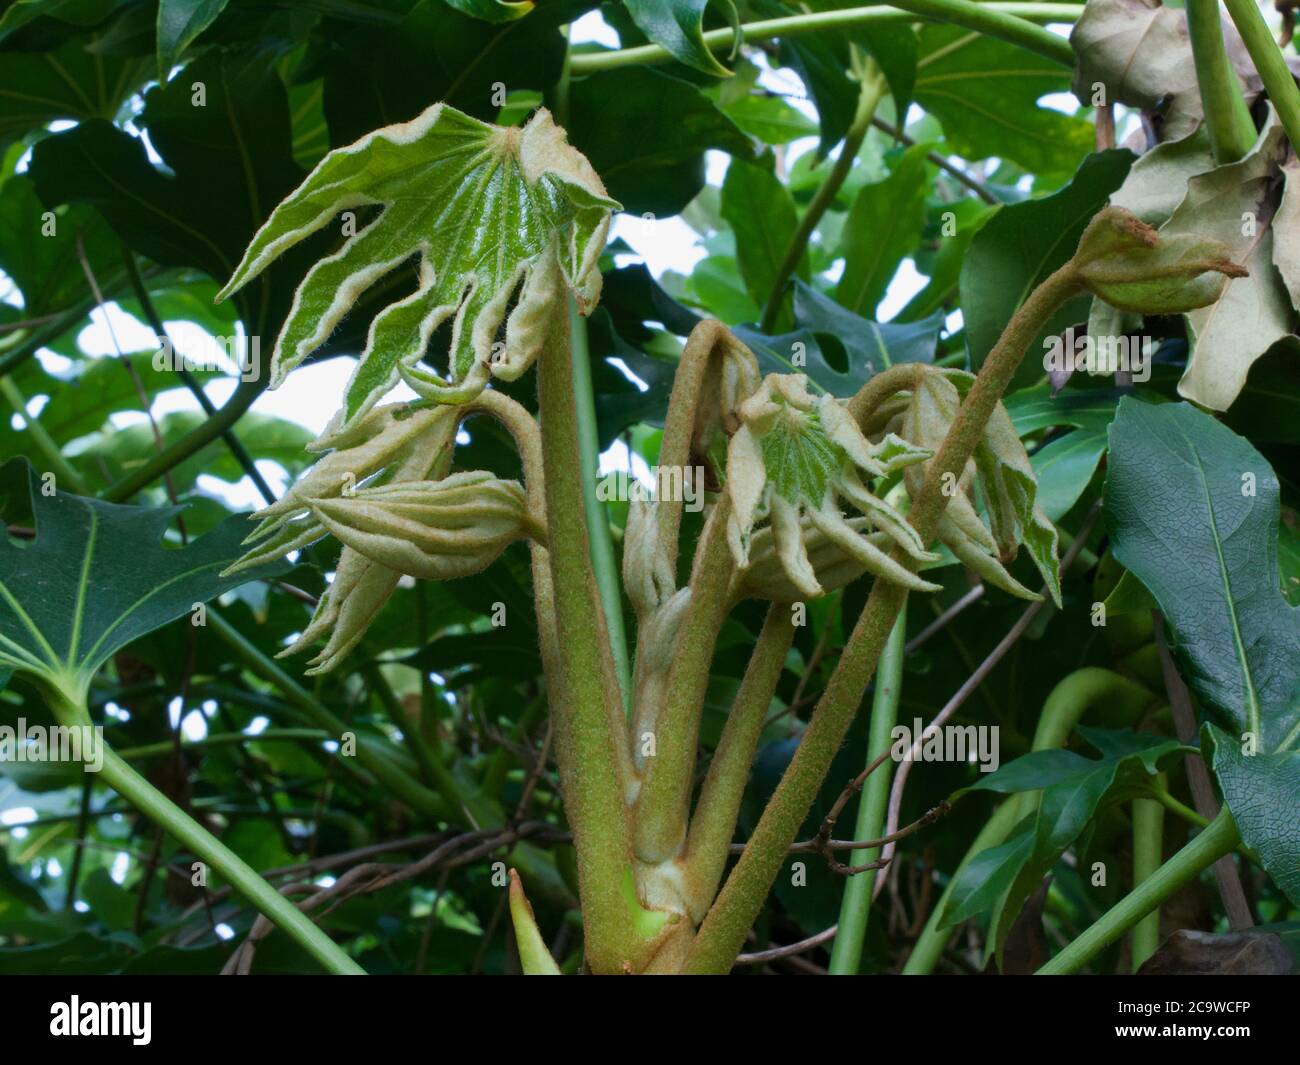 New fatsia leaves interesting handlike shapes growing in spring Stock Photo